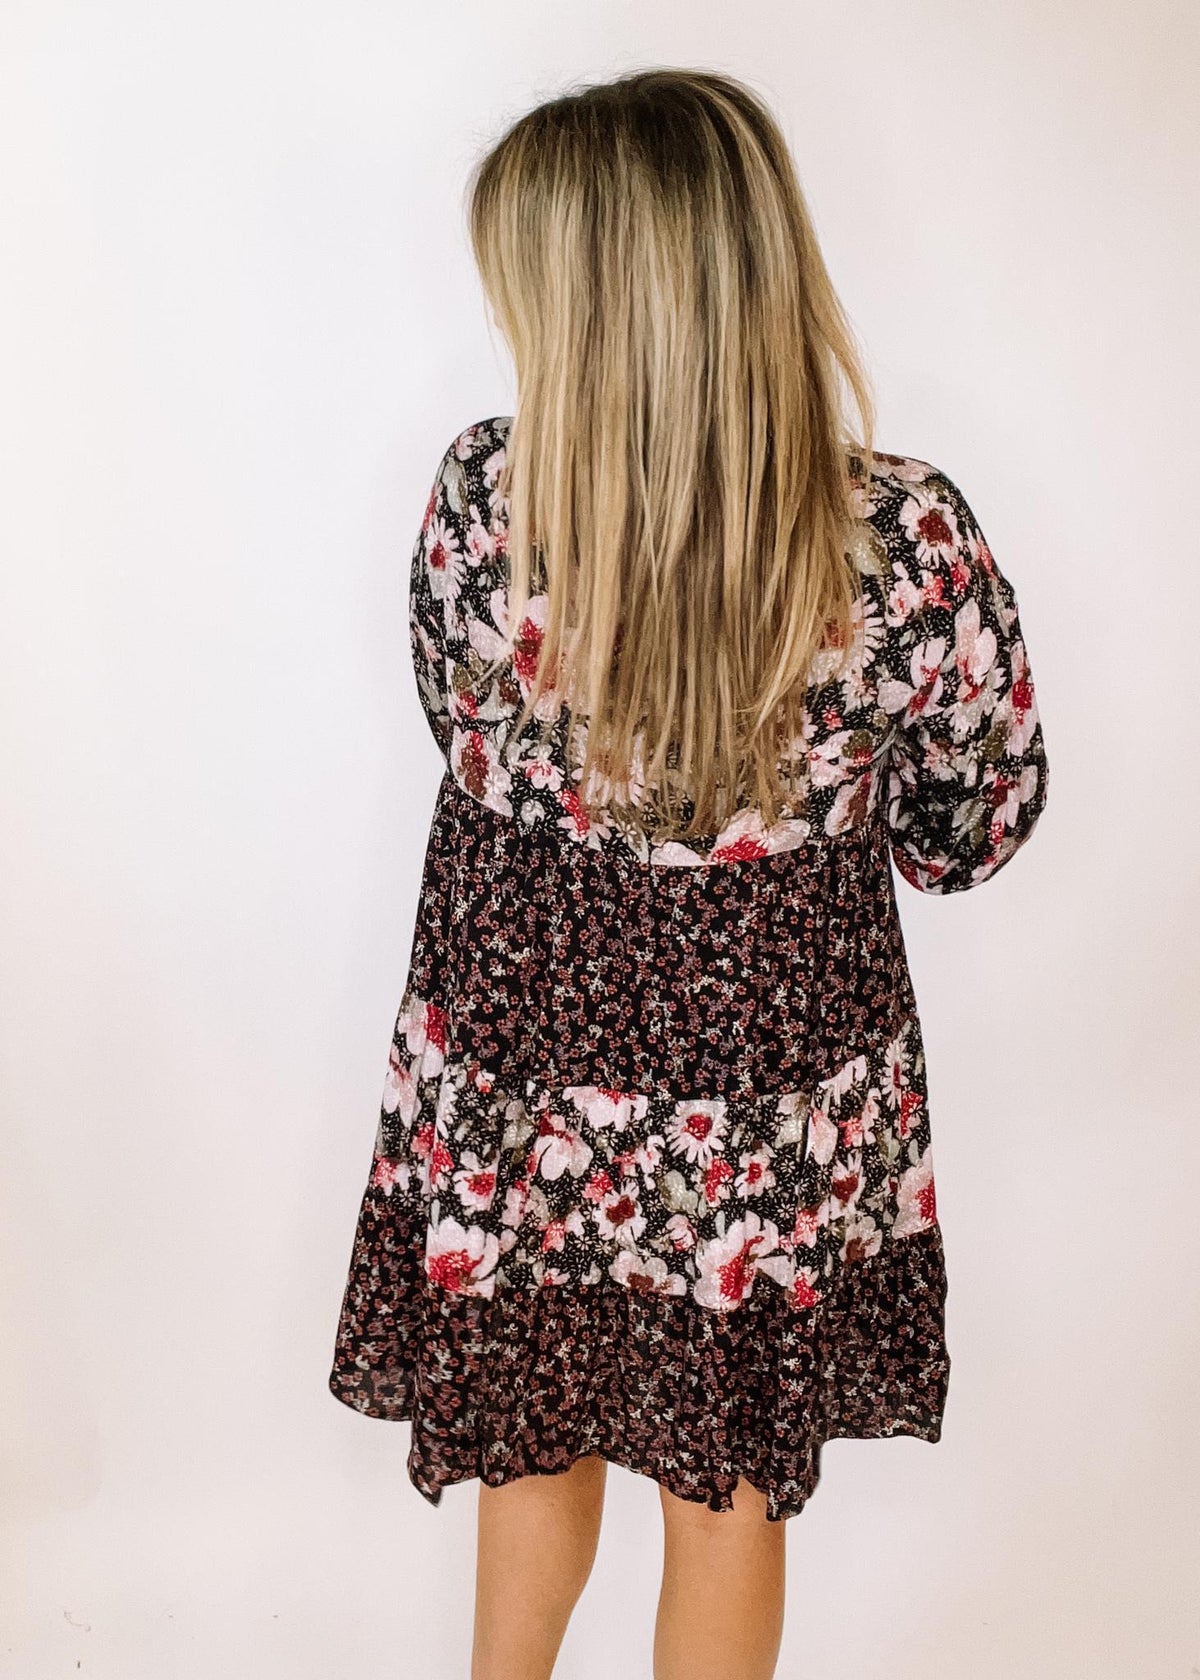 Speckle Print Block Tiered Floral Dress